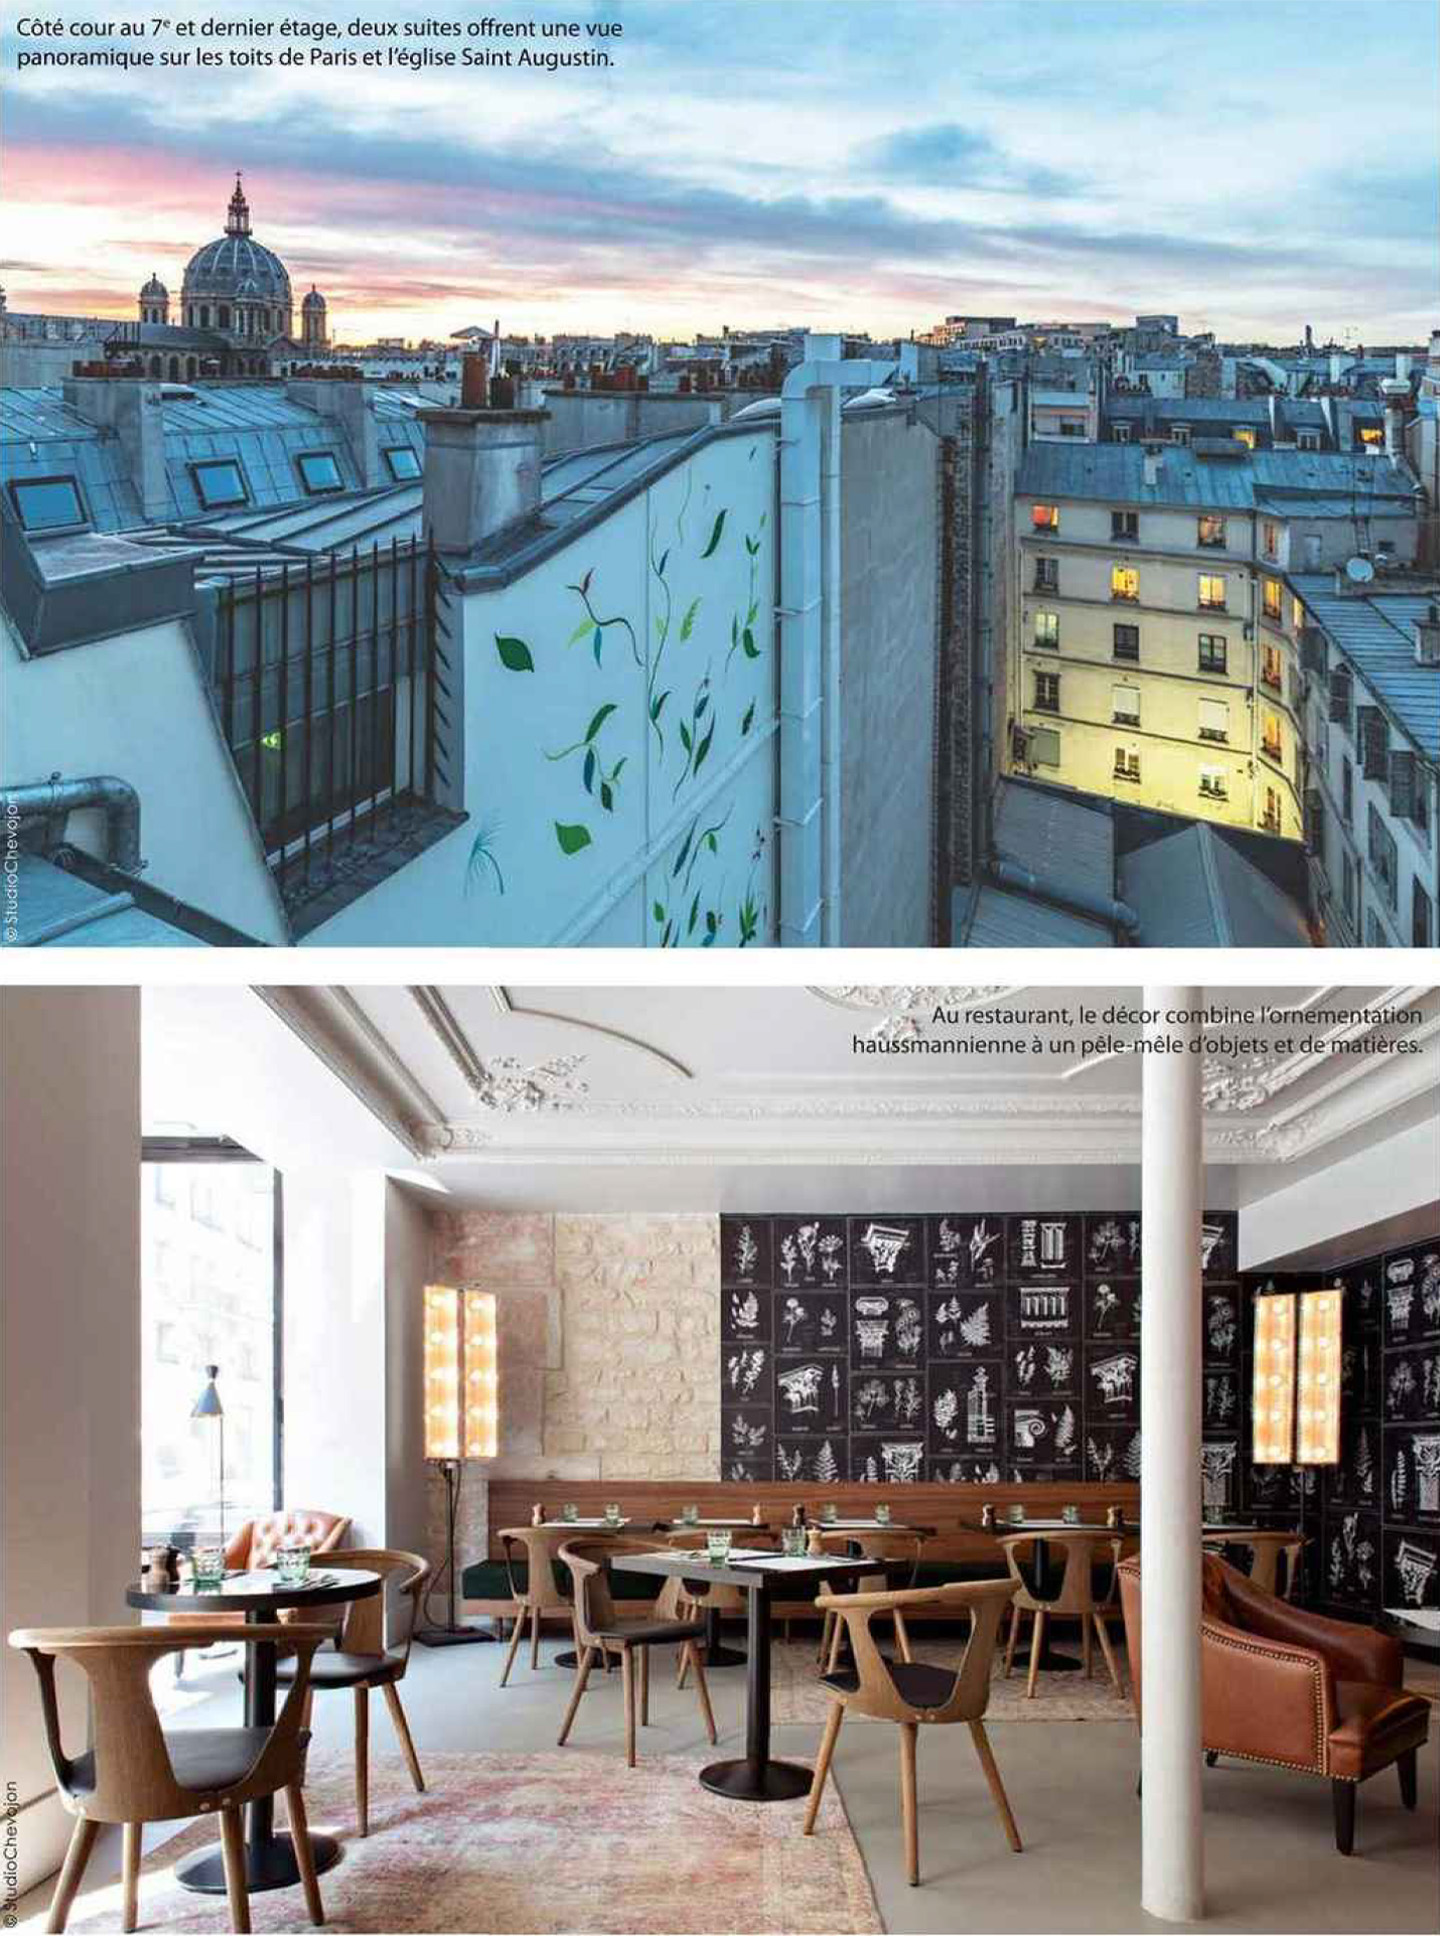 Article on the belleval by jean-Philippe Nuel studio in the magazine voyage de luxe, new lifestyle hotel, luxury interior design, paris center, french luxury hotel